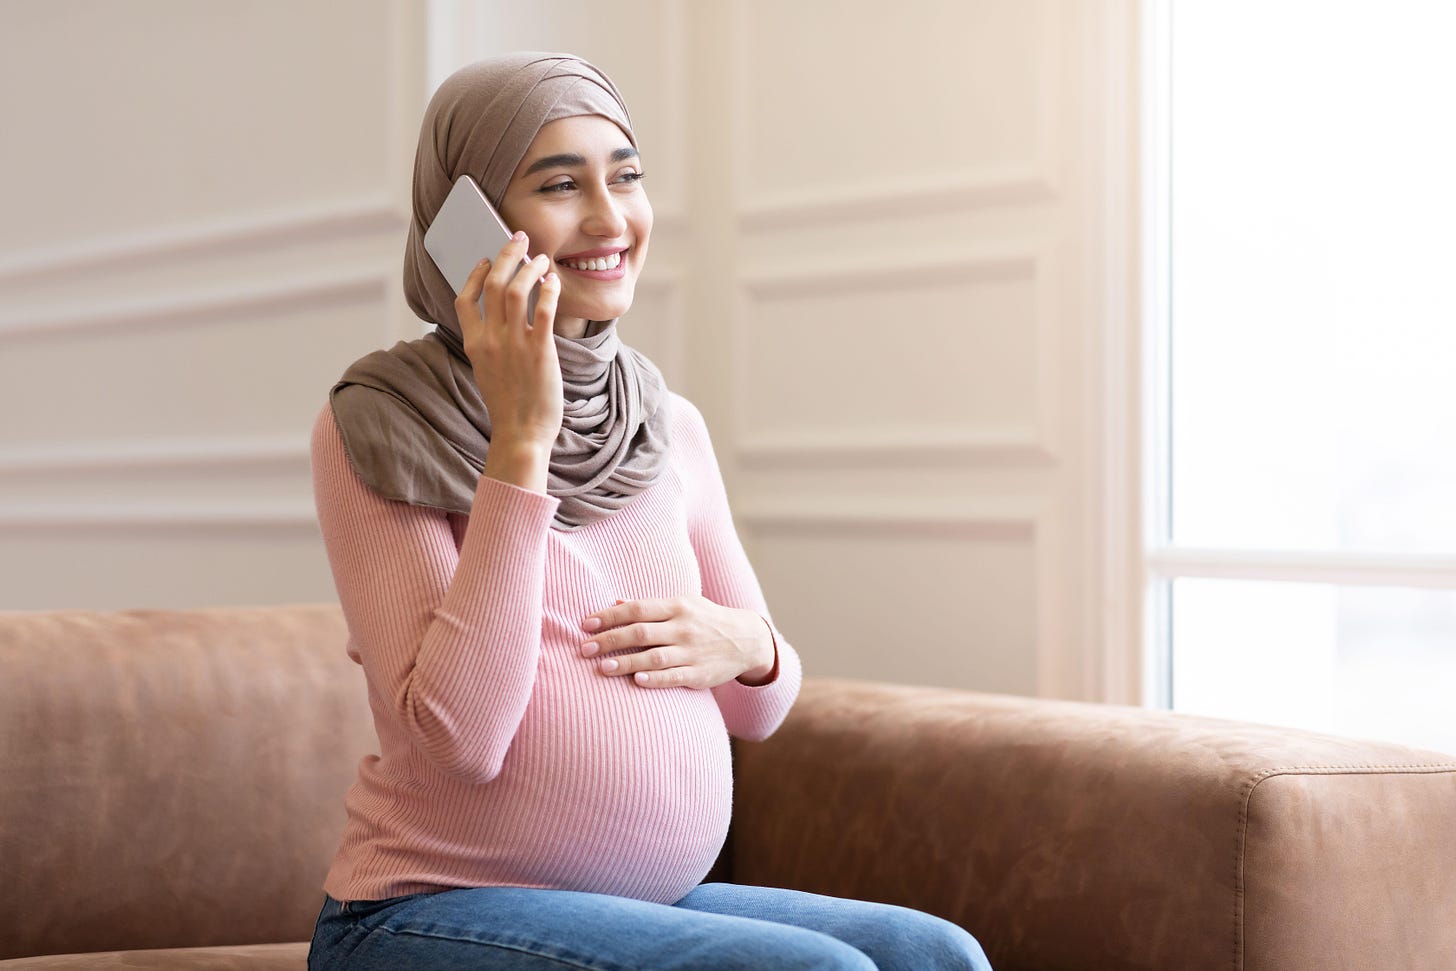 A young pregnant Muslim woman talking on the phone